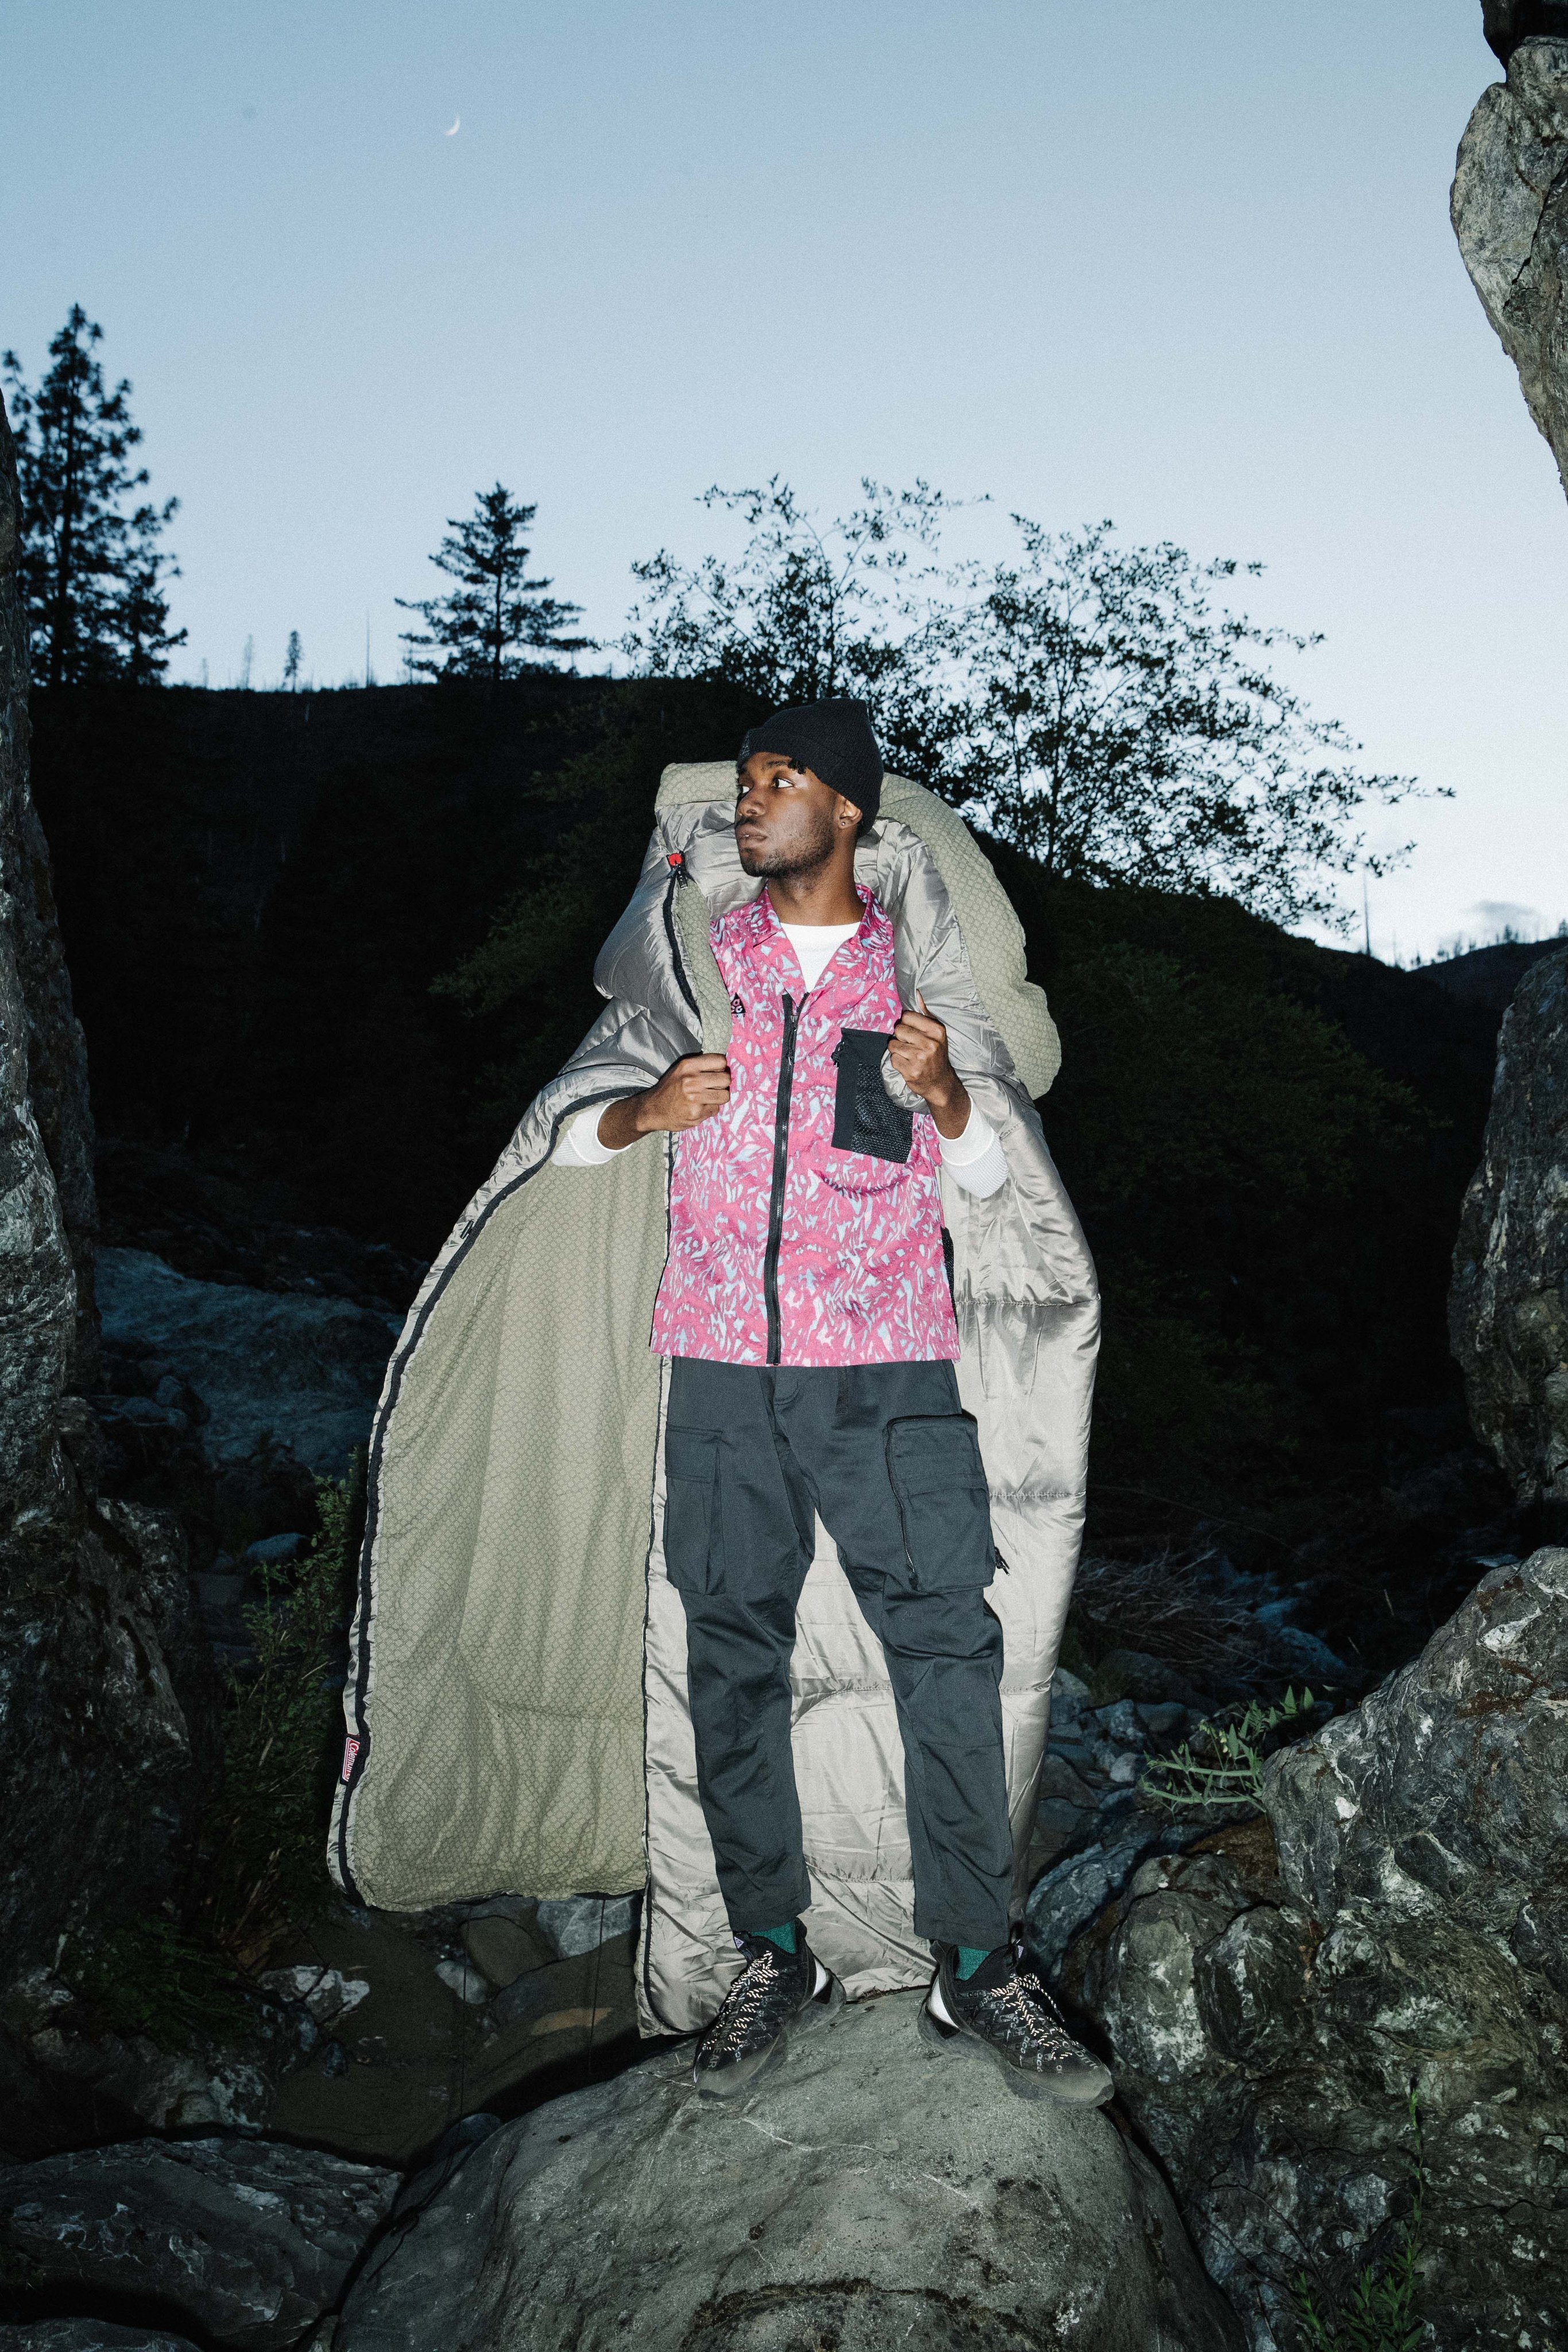 HANON on Twitter: ACG FW19 Collection is available to buy ONLINE now! #nike #acg #allconditionsgear https://t.co/mTF4NhbUIy" / Twitter